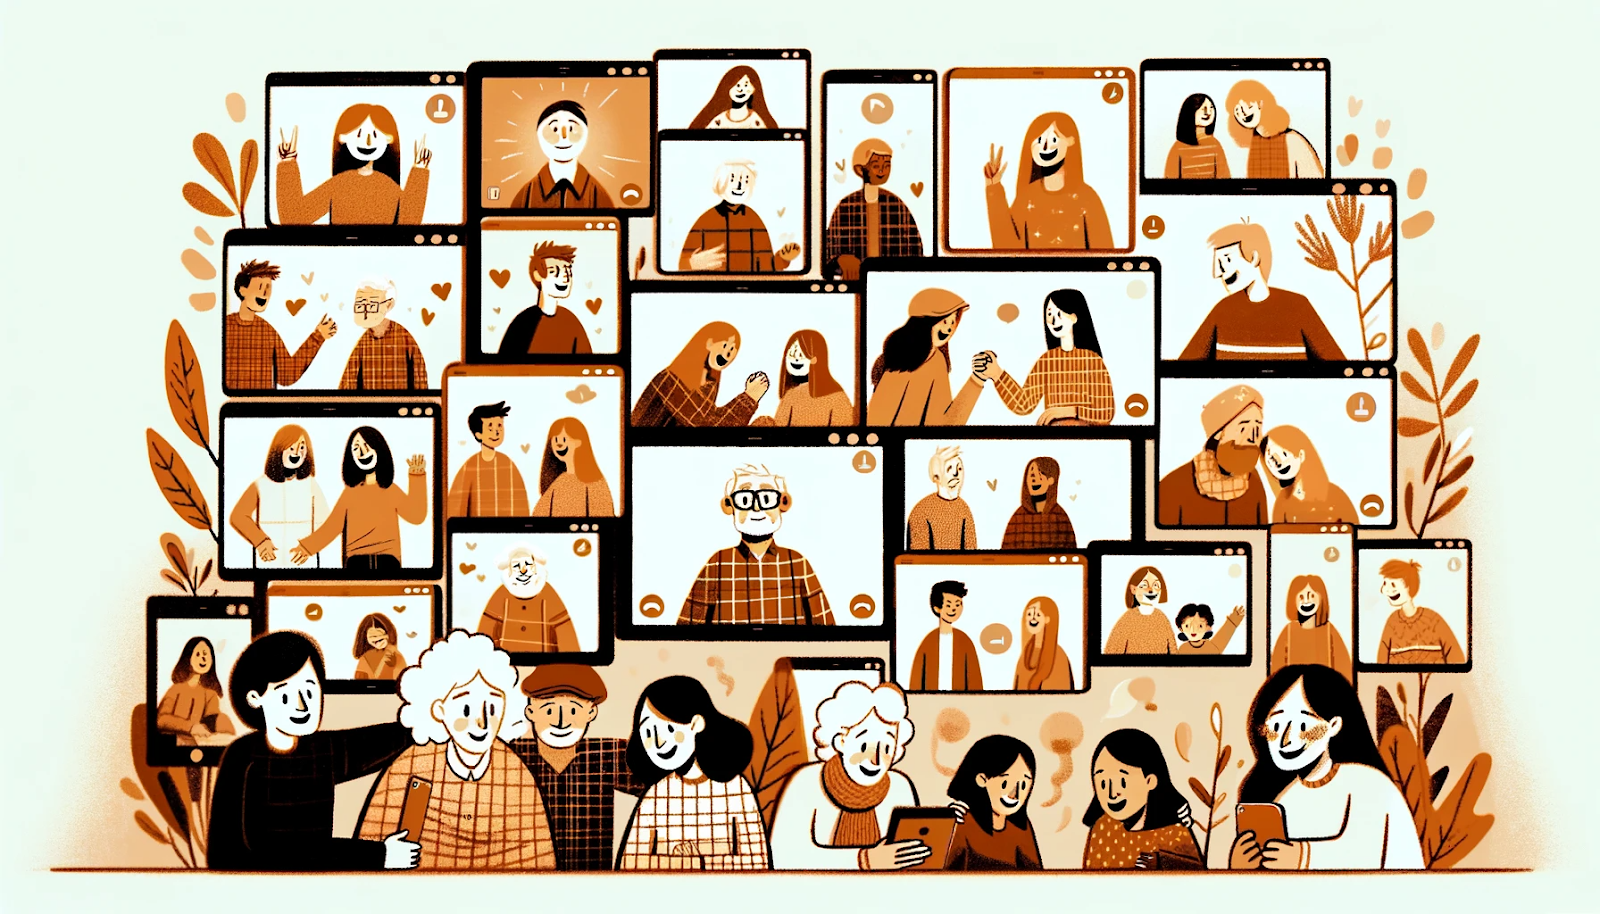 Cartoon depicting multiple friends and family members of various ages connecting over a video call